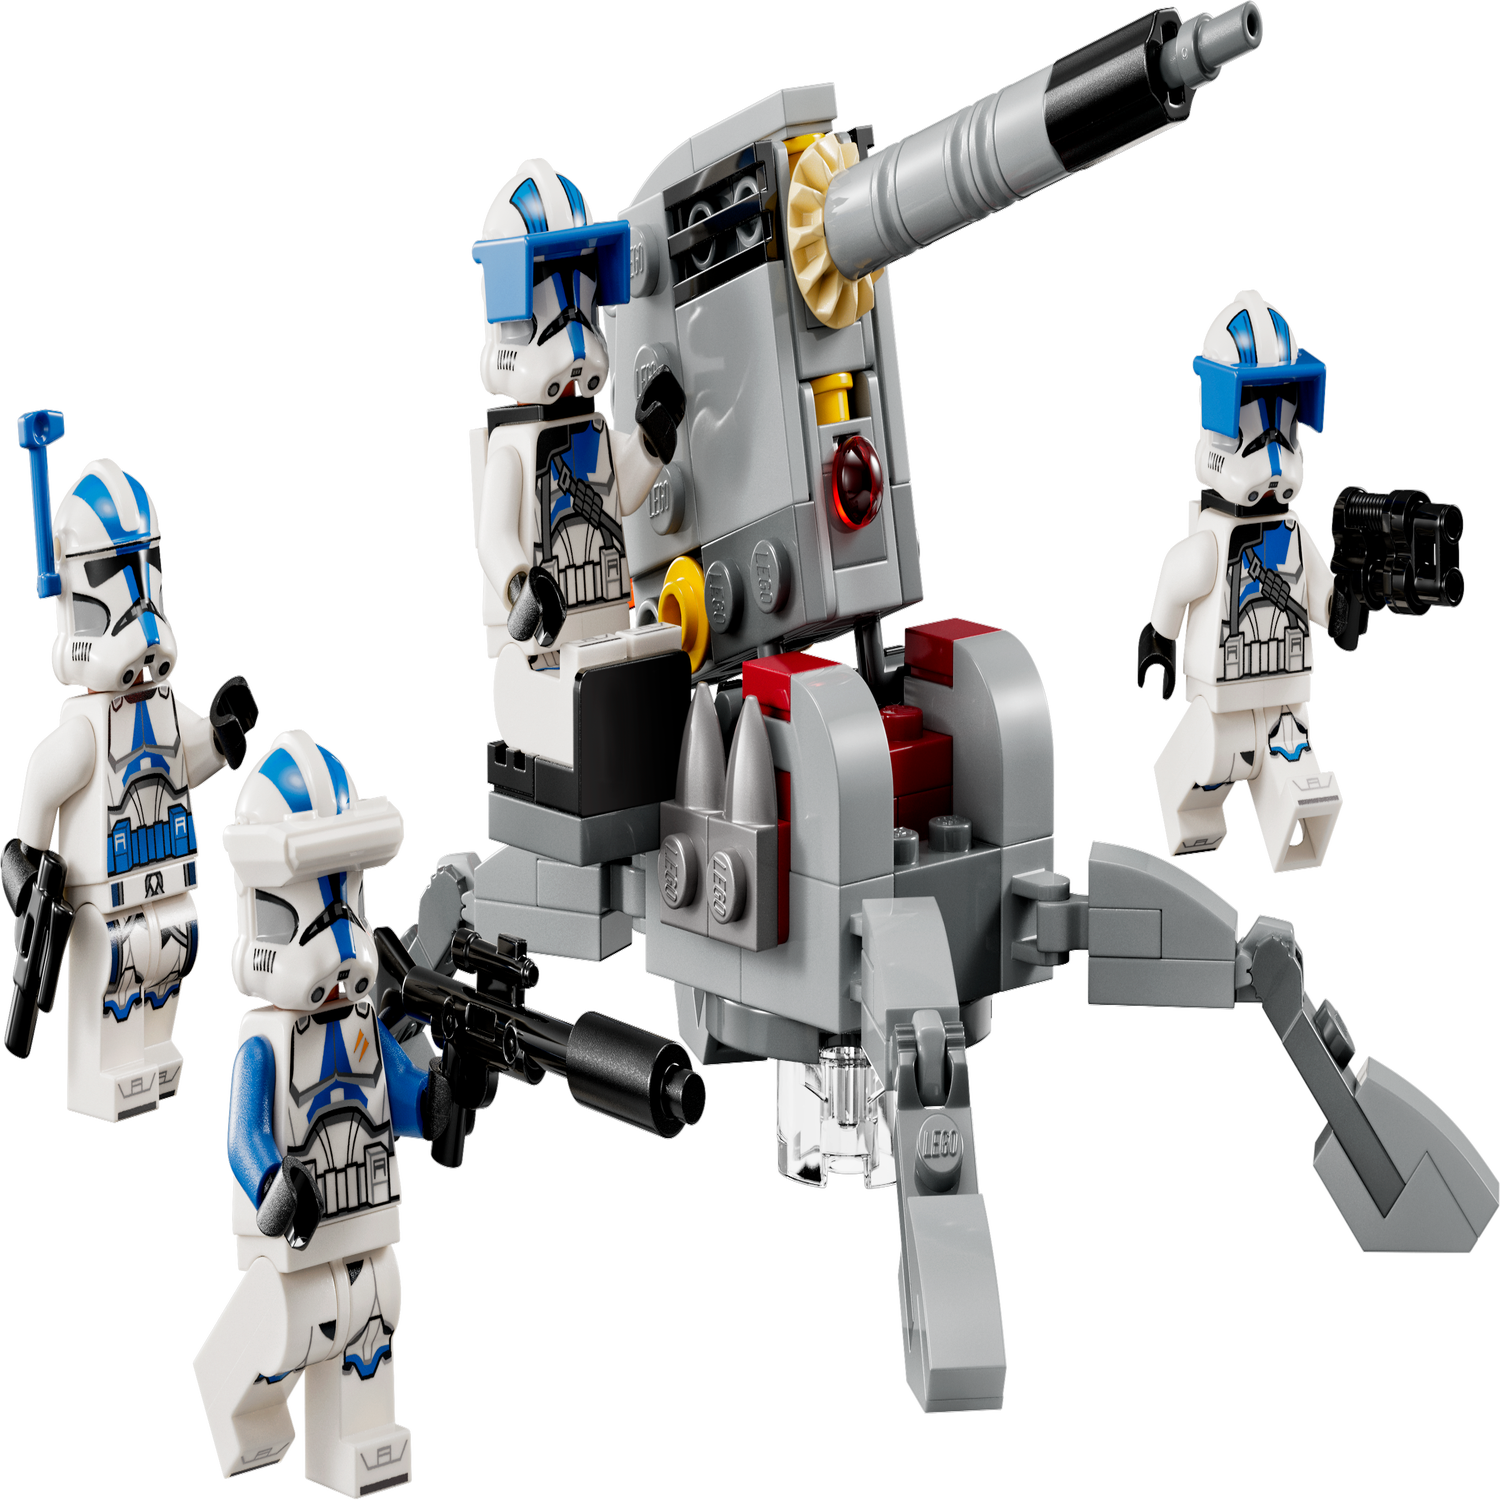 Stormtrooper™ Mech 75370 | Star Wars™ | Buy online at the Official LEGO®  Shop US